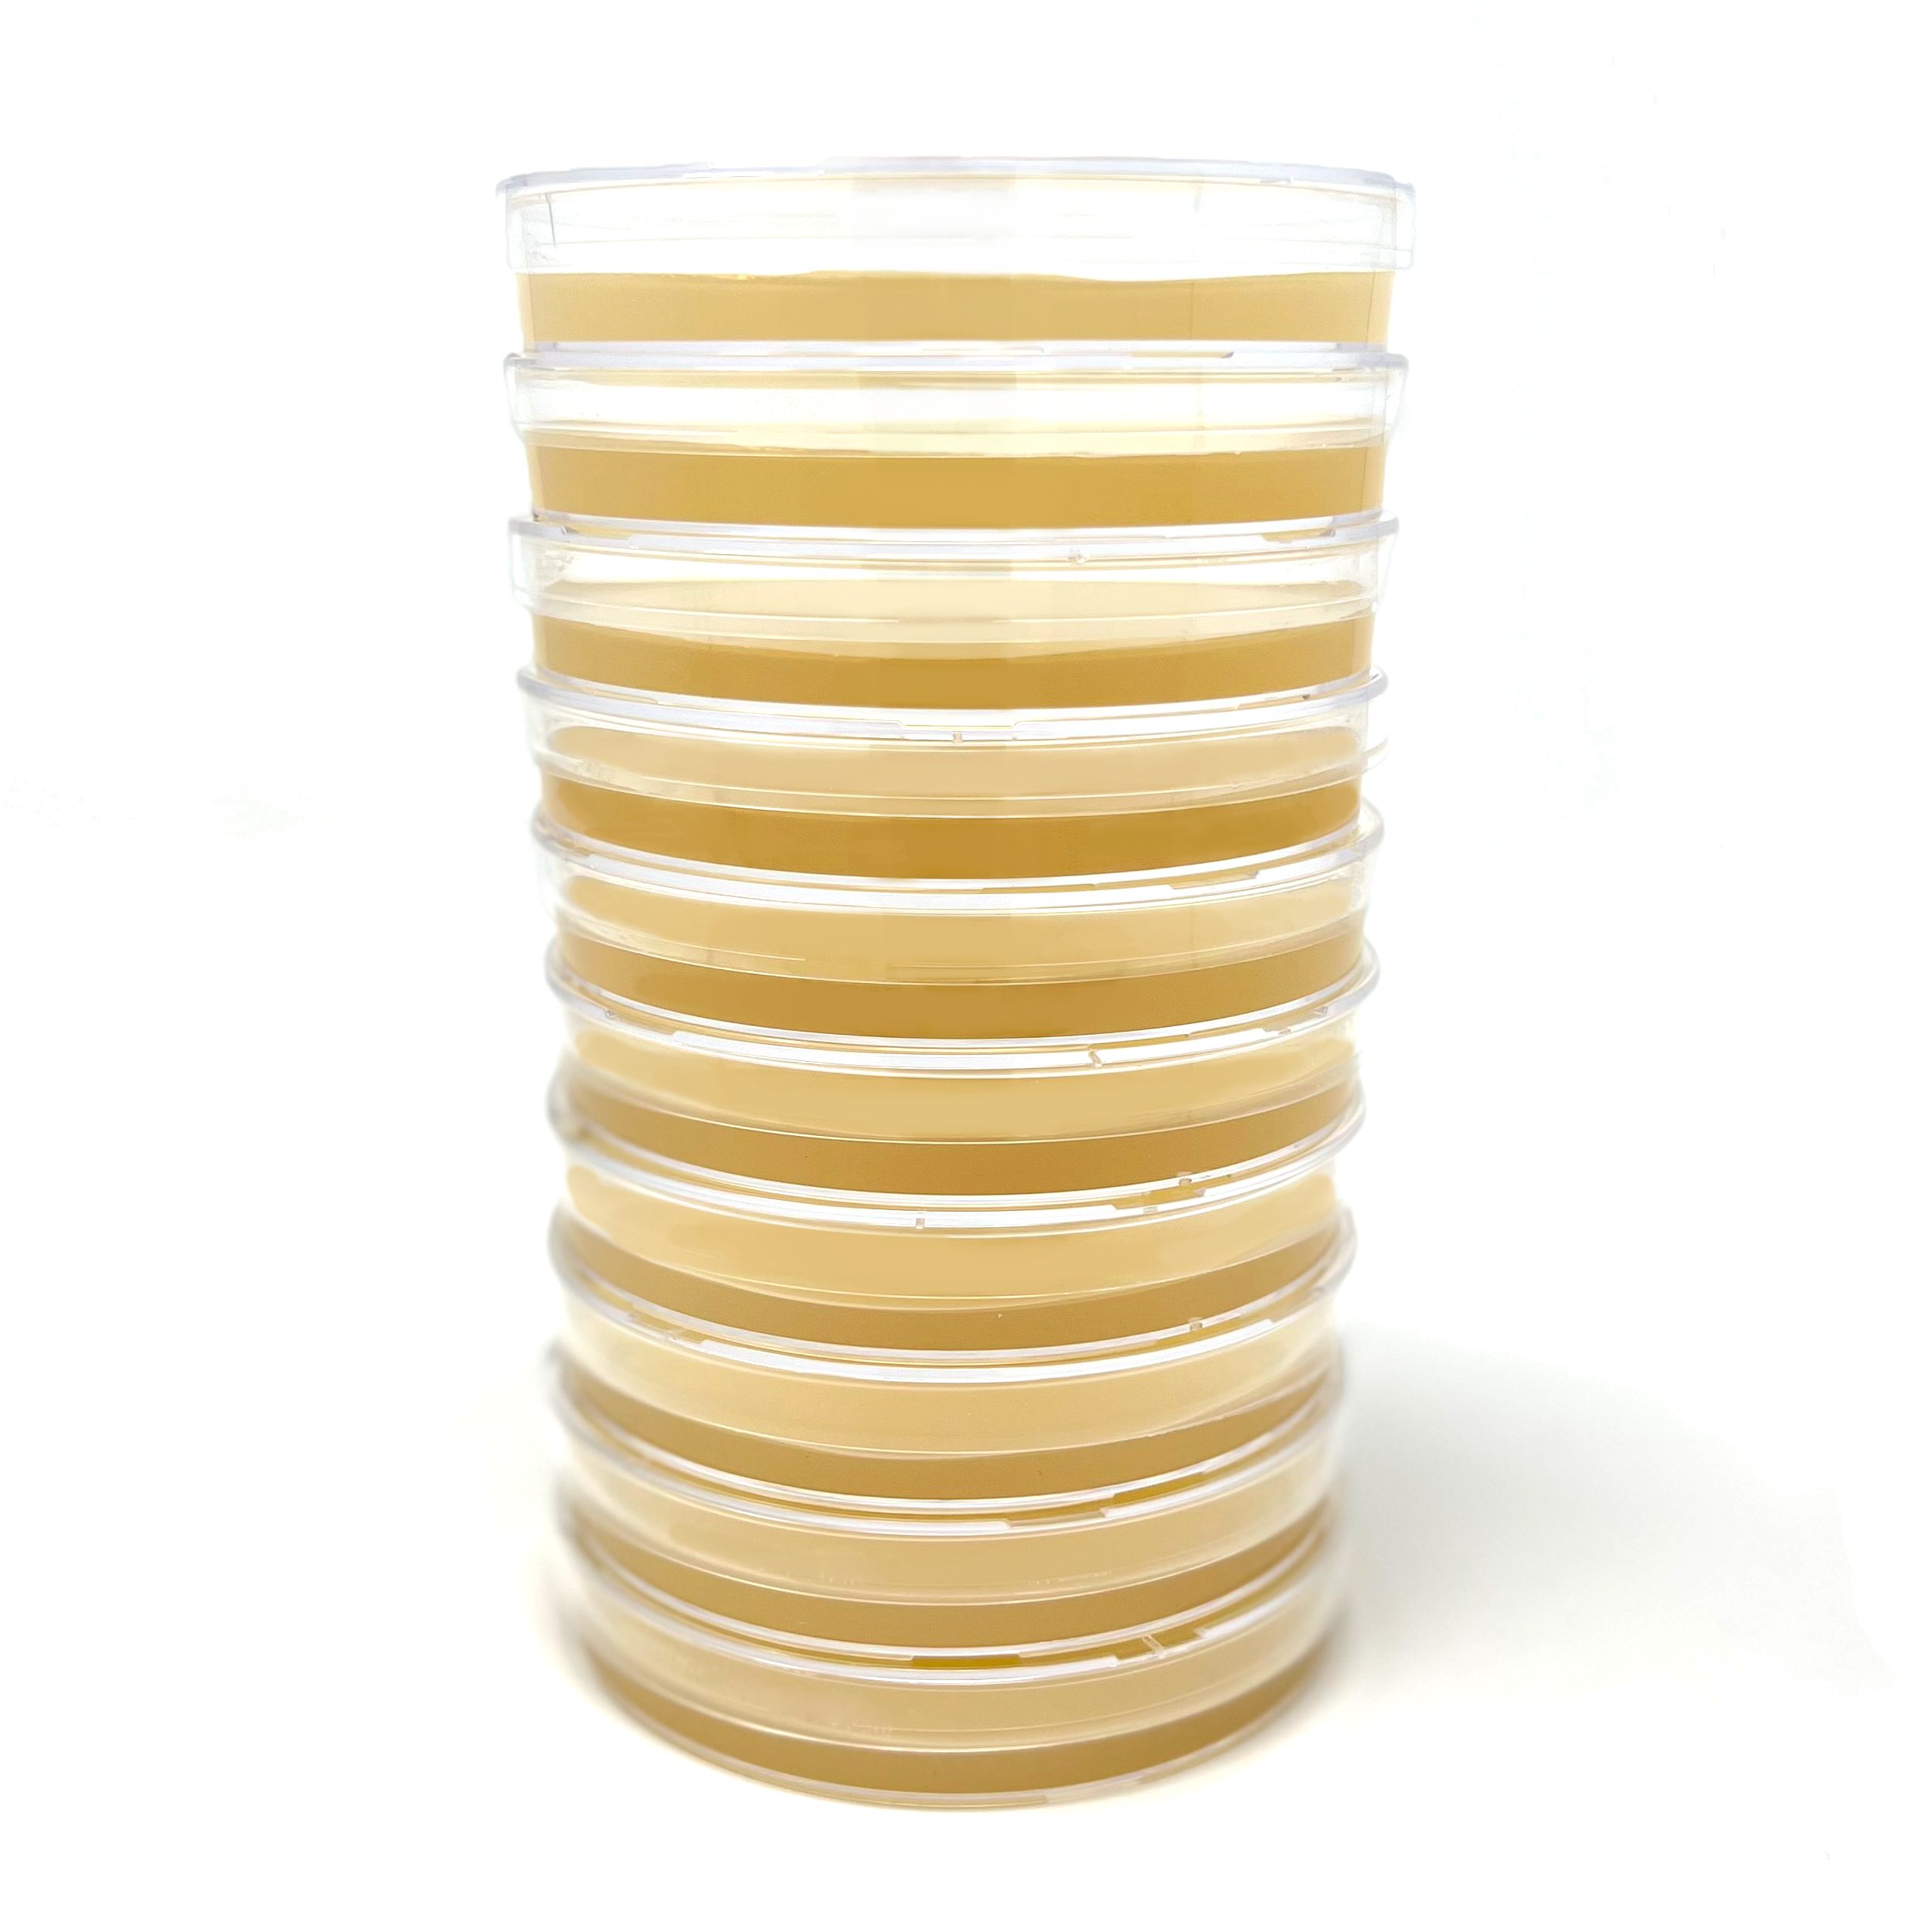 malt yeast extract agar plates stack of 10